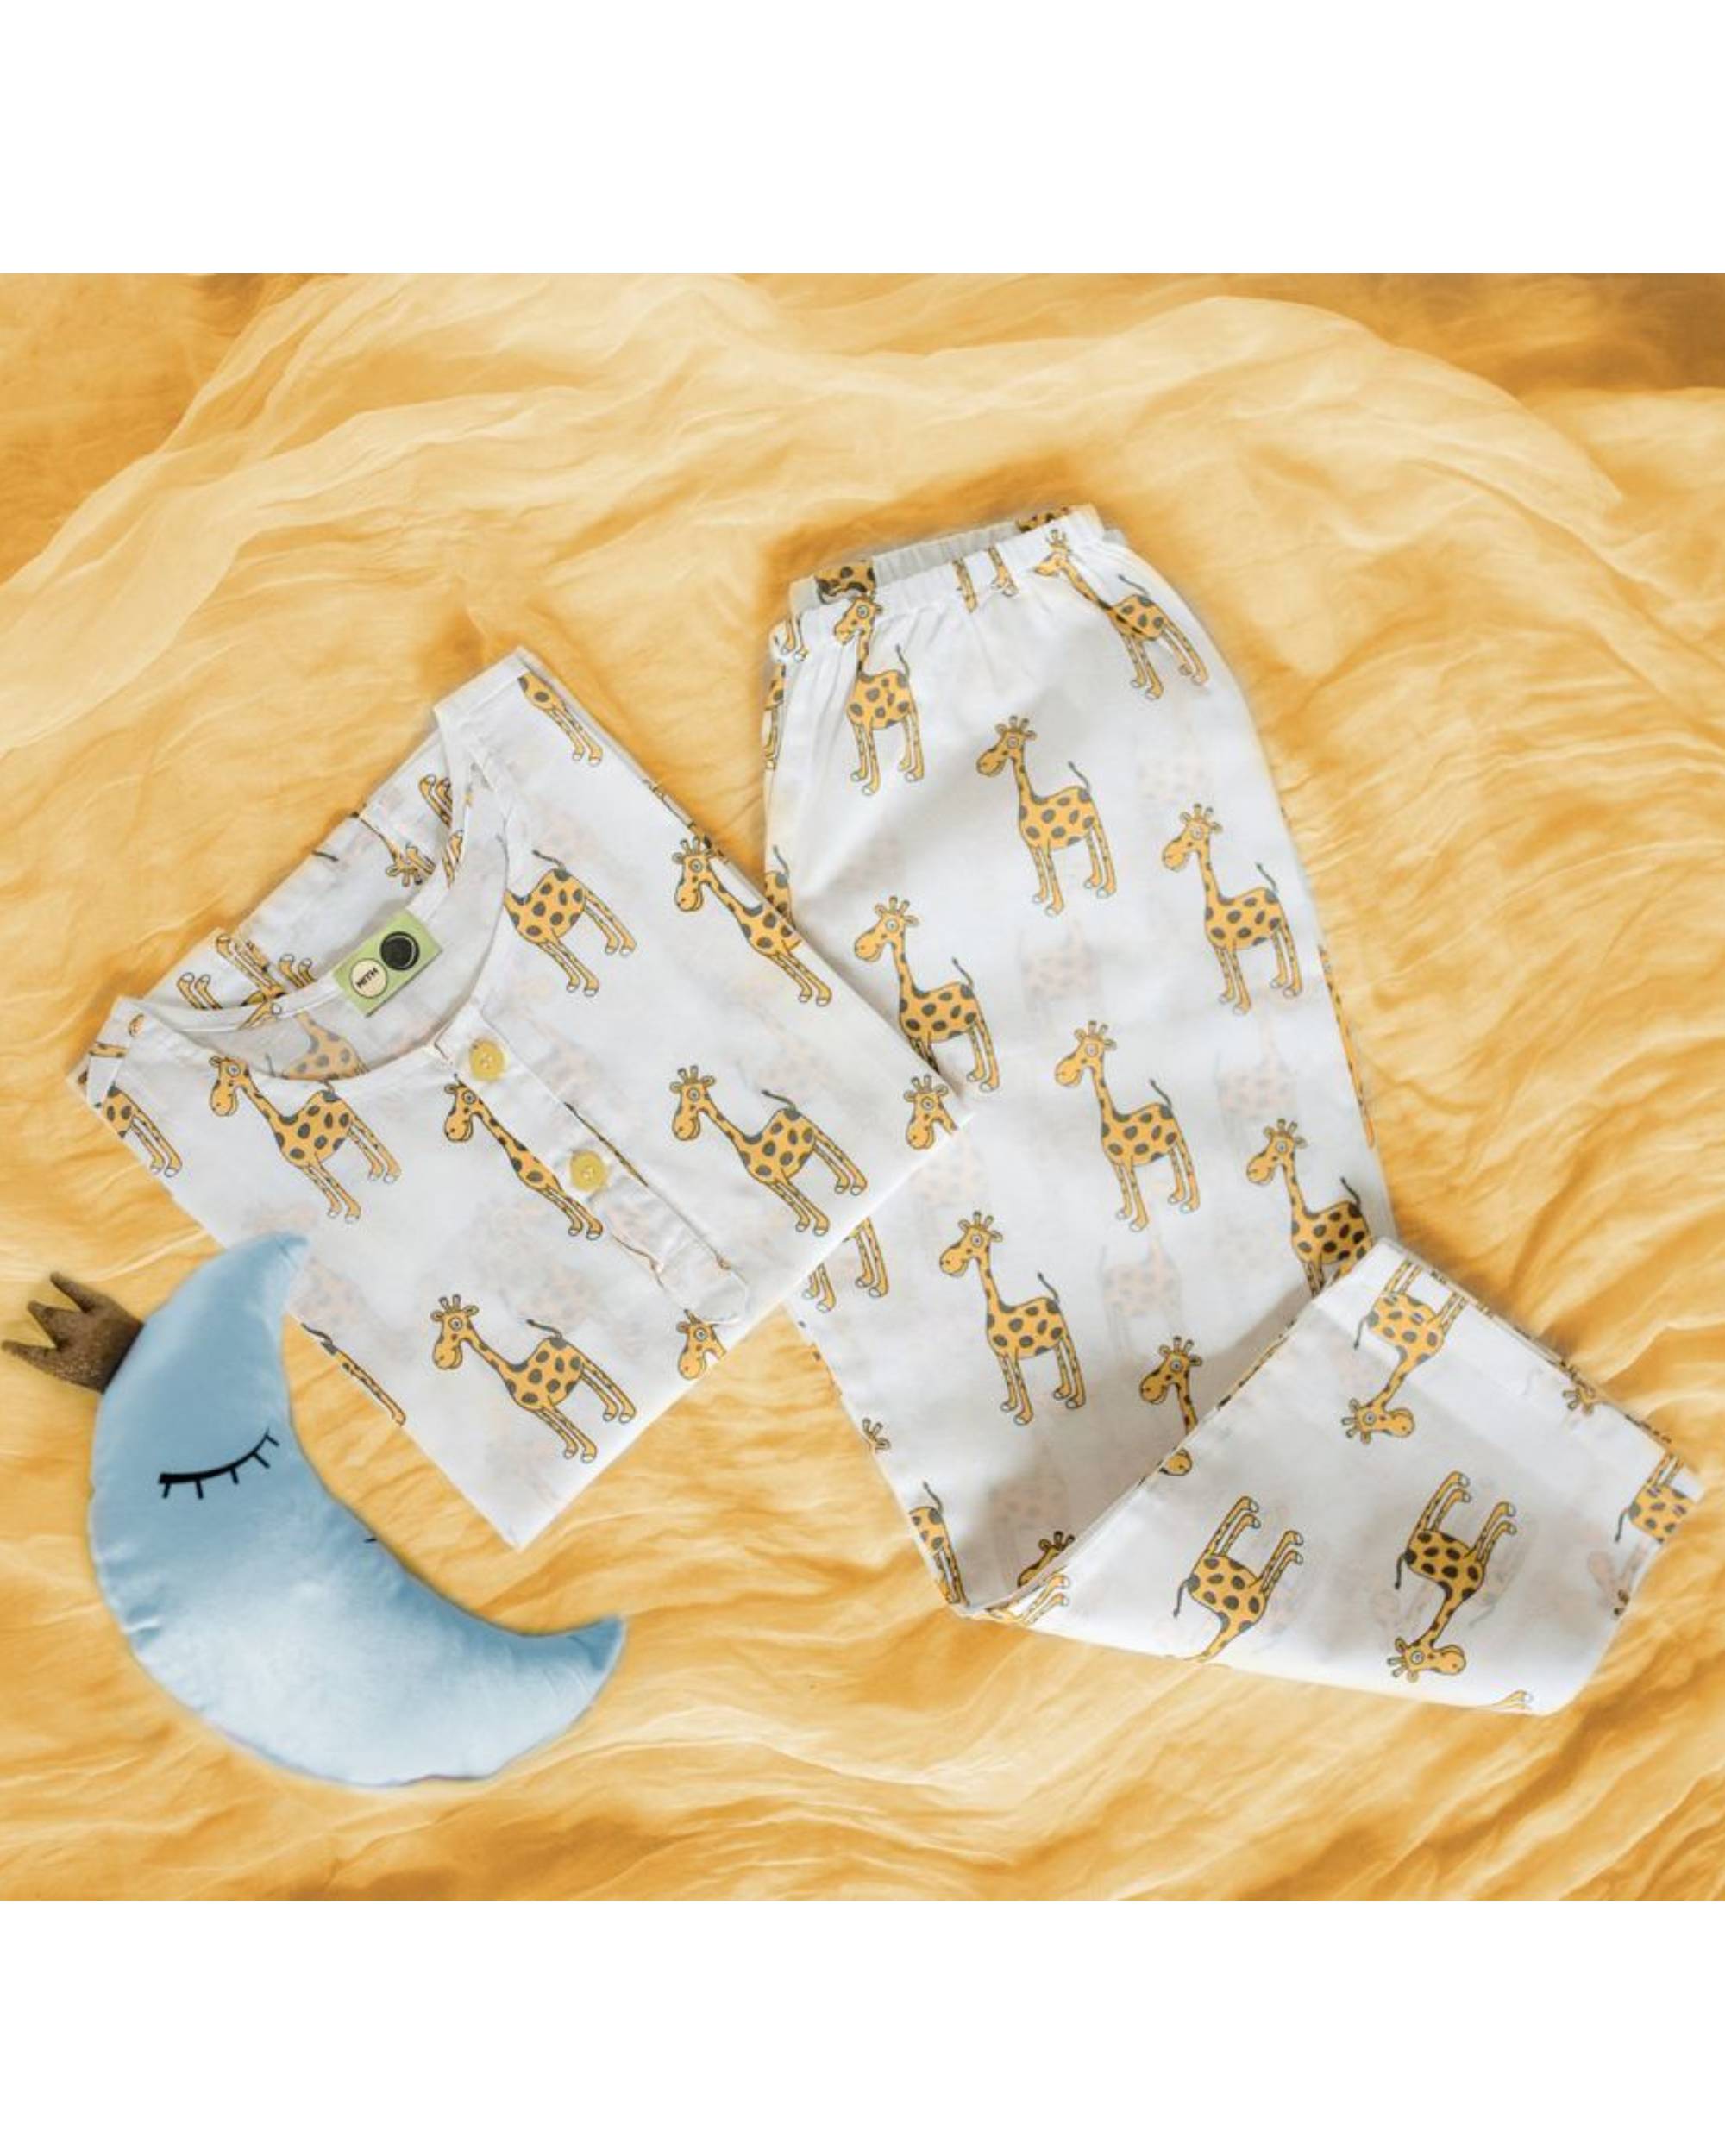 White and yellow giraffe printed unisex night suit - set of two